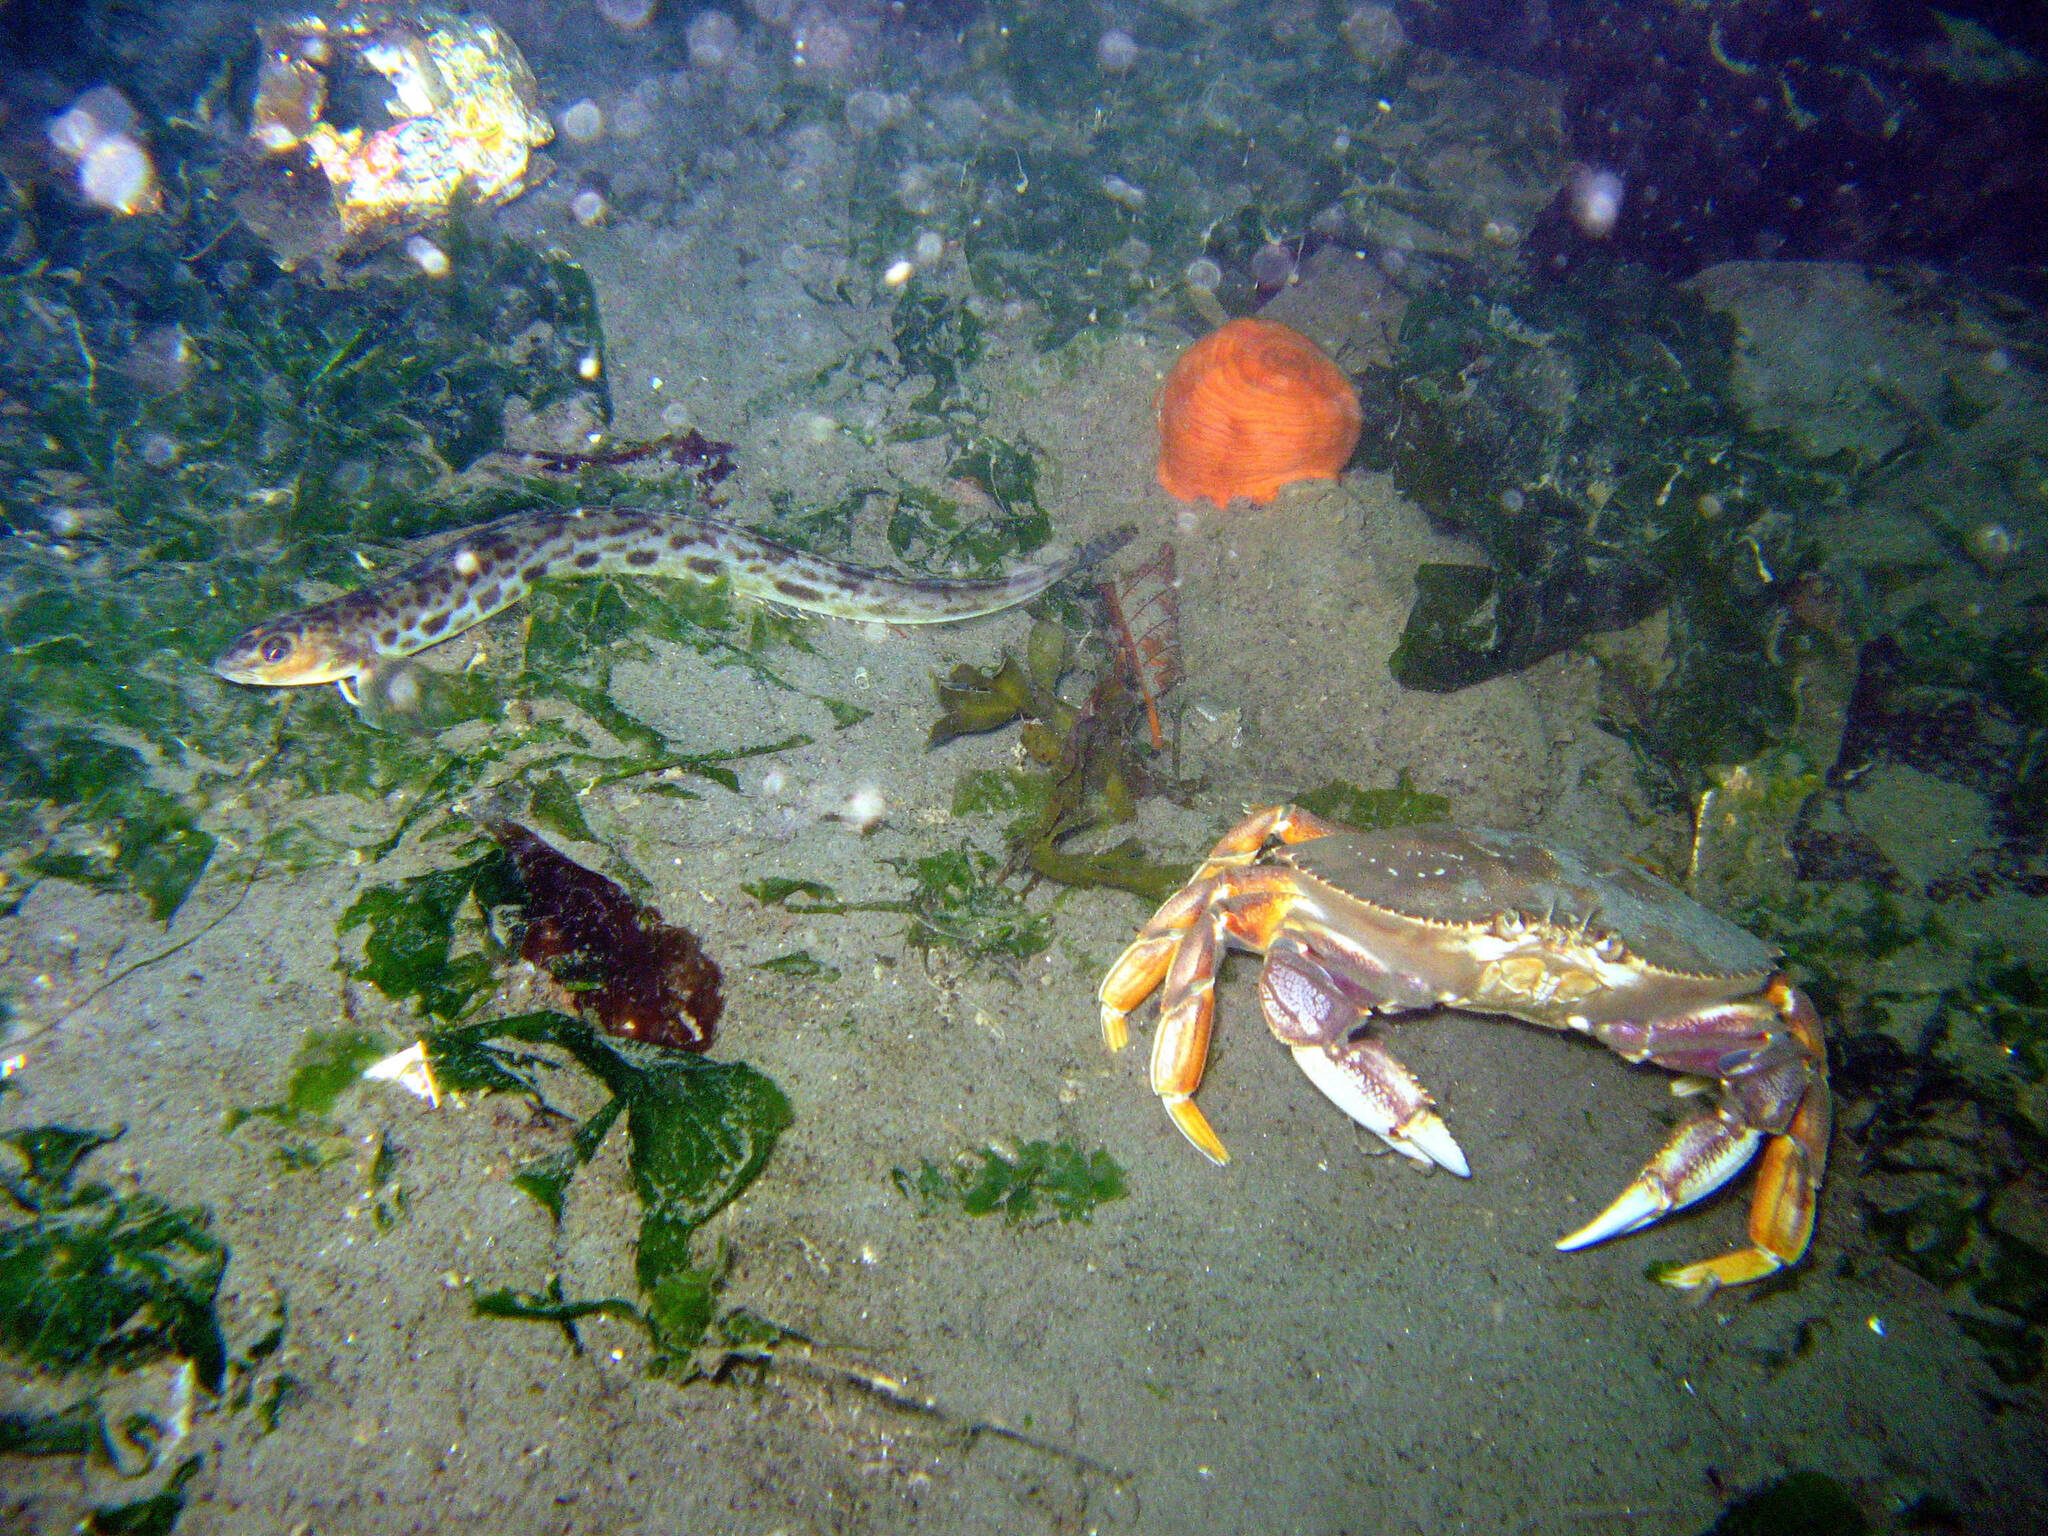 Rhoda H. Green / NMFS 
Dungeness crab are found throughout the national marine sanctuaries along the West Coast in one of the most biologically productive ocean environments in the world — the California Current Large Marine Ecosystem.